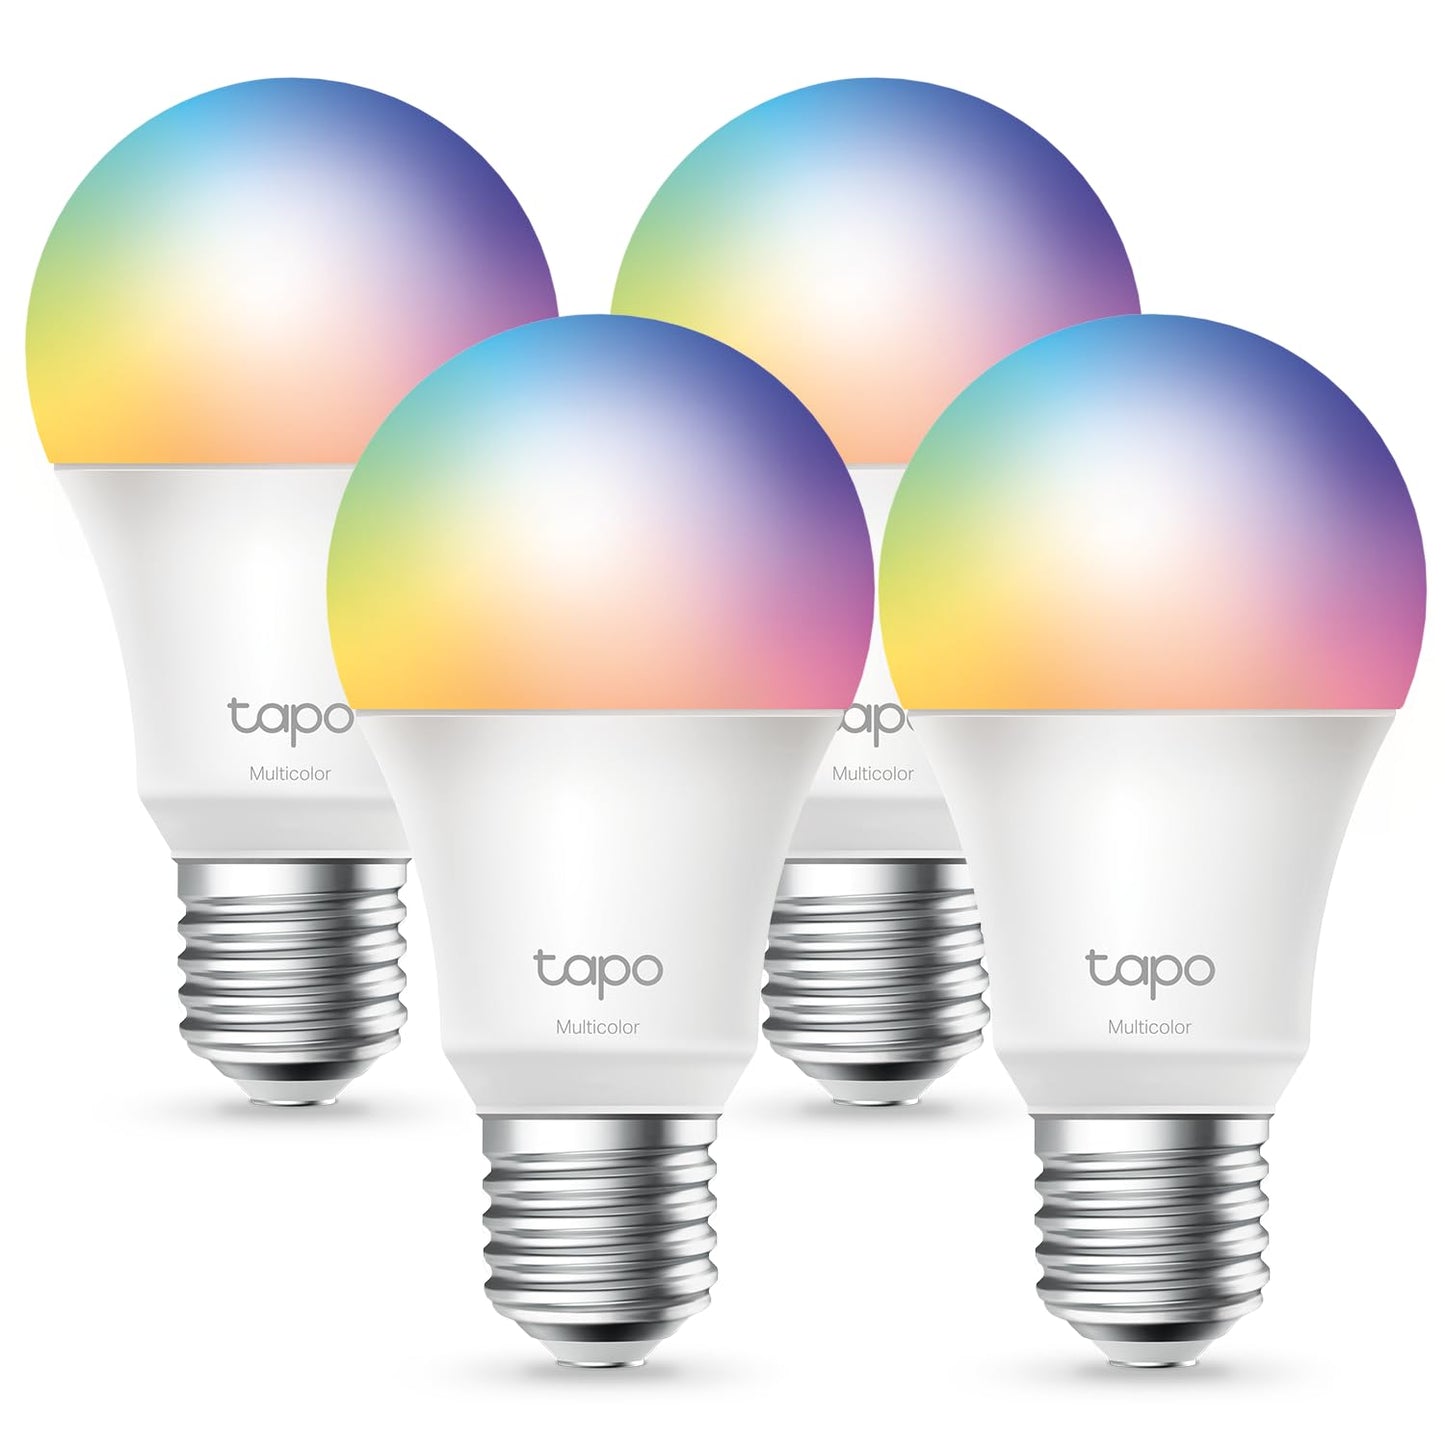 TP-Link Tapo Smart Light Bulbs, 16M Colors RGBW, Dimmable, Compatible with Alexa and Google Home, A19, 60W Equivalent, 800LM CRI>90, 2.4GHz WiFi only, No Hub Required, Tapo L530E(4-Pack)